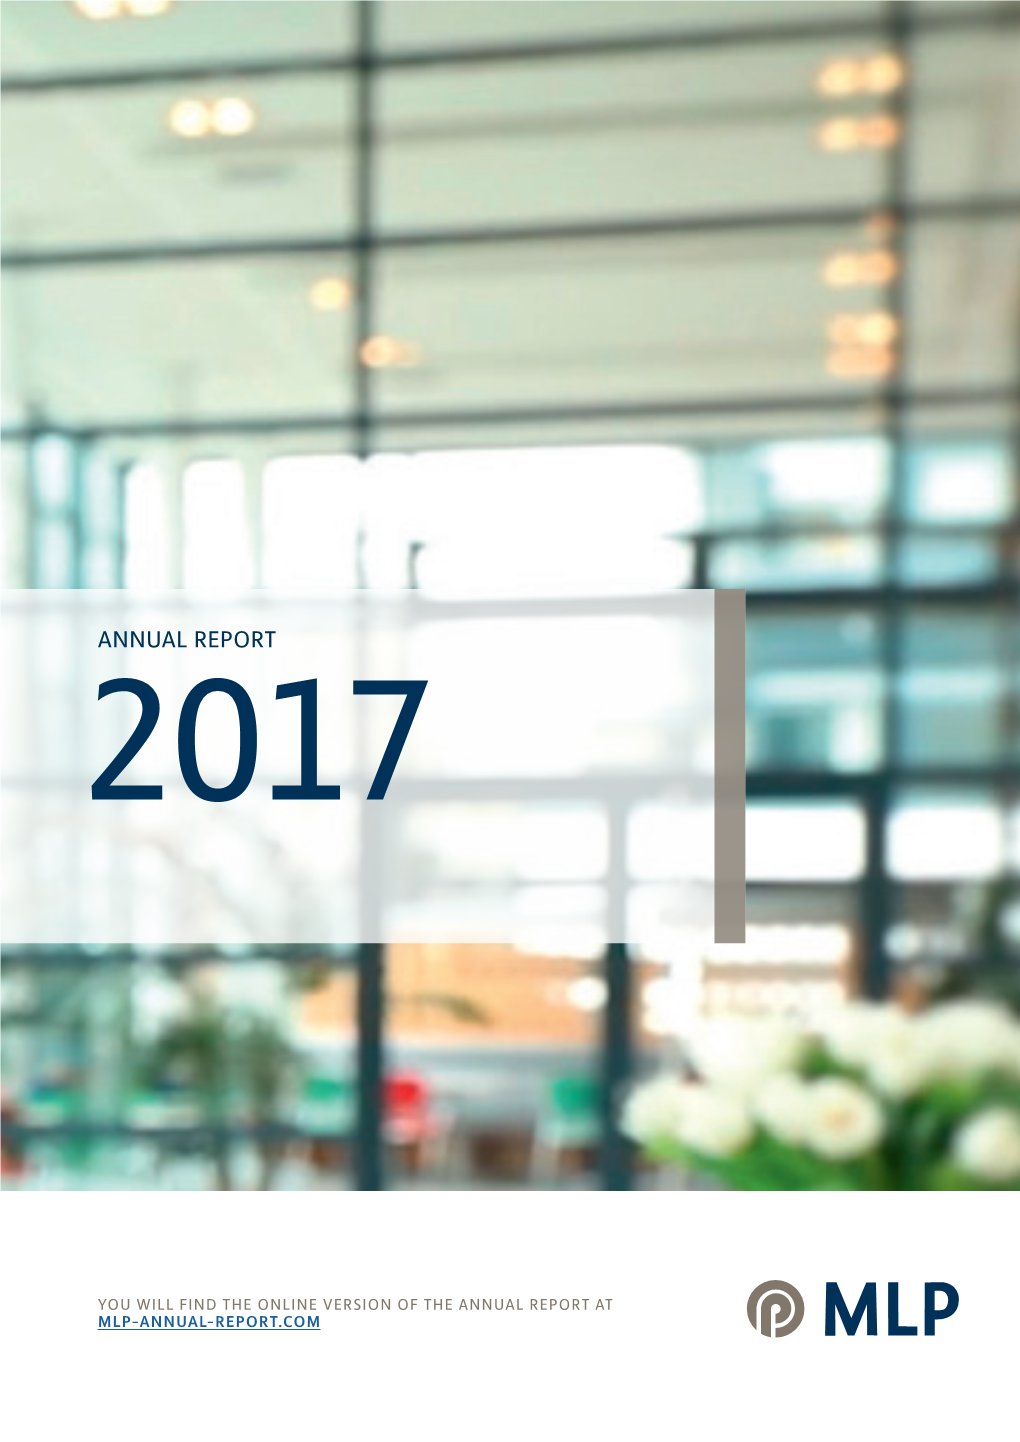 MLP Group Annual Report 2017